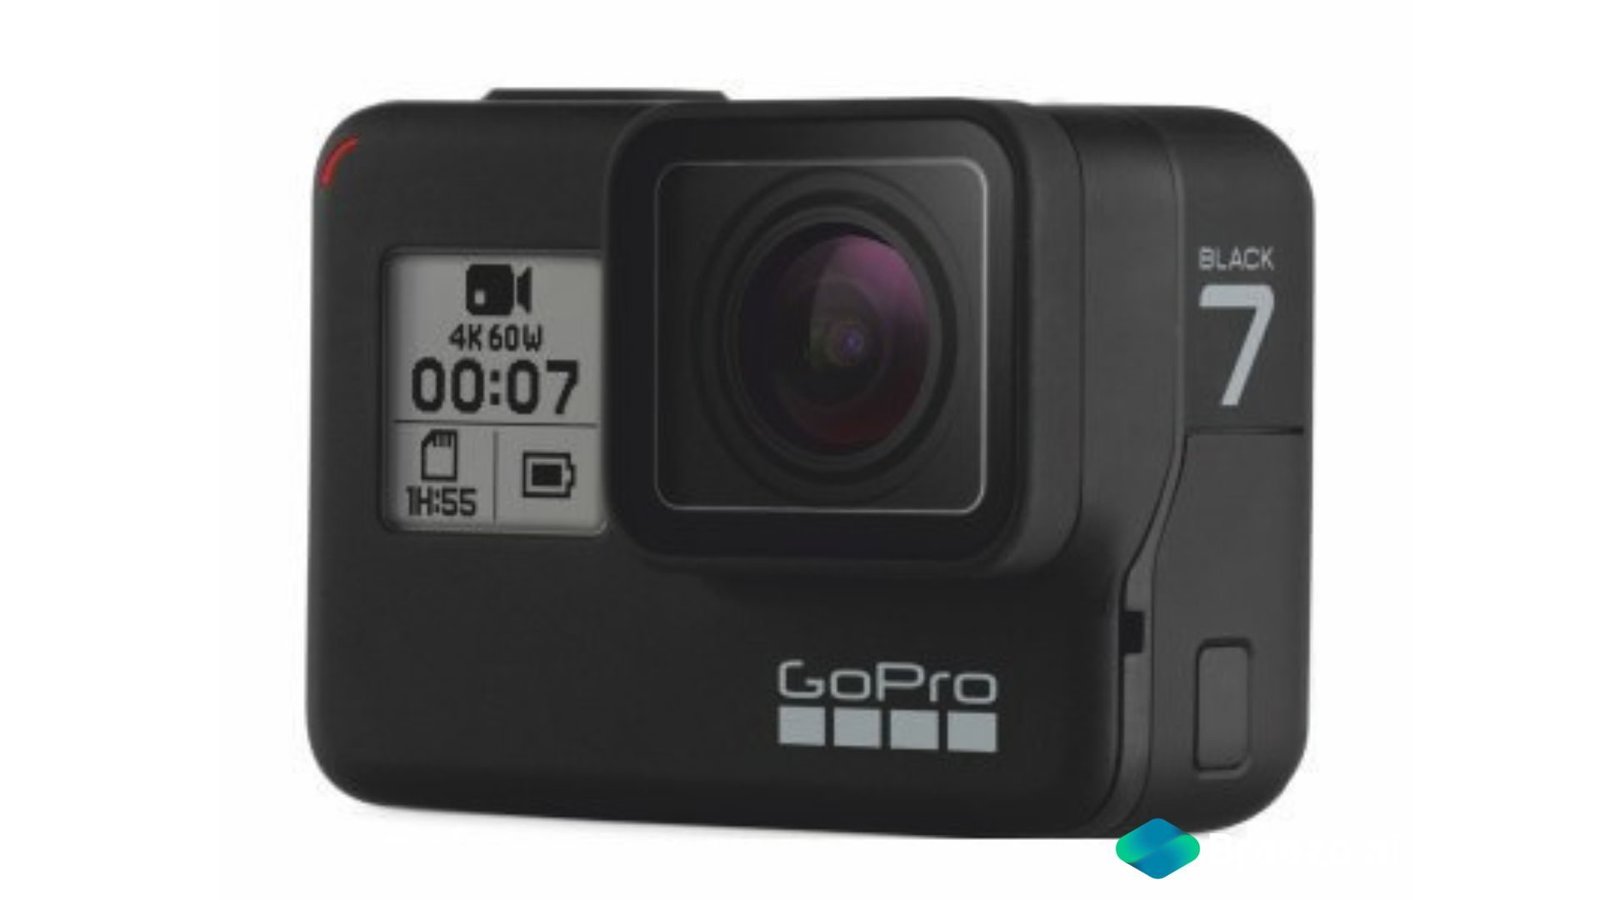 Rent GoPro Hero 7 Camera With All Accessories in Delhi NCR, Camera accessories, Camera lenses for rent, in Delhi Gurgaon Noida, hire Shooting equipment, Lighting equipment rental, Film gear rental for Video production, camera rental company in Delhi, film equipment rental company